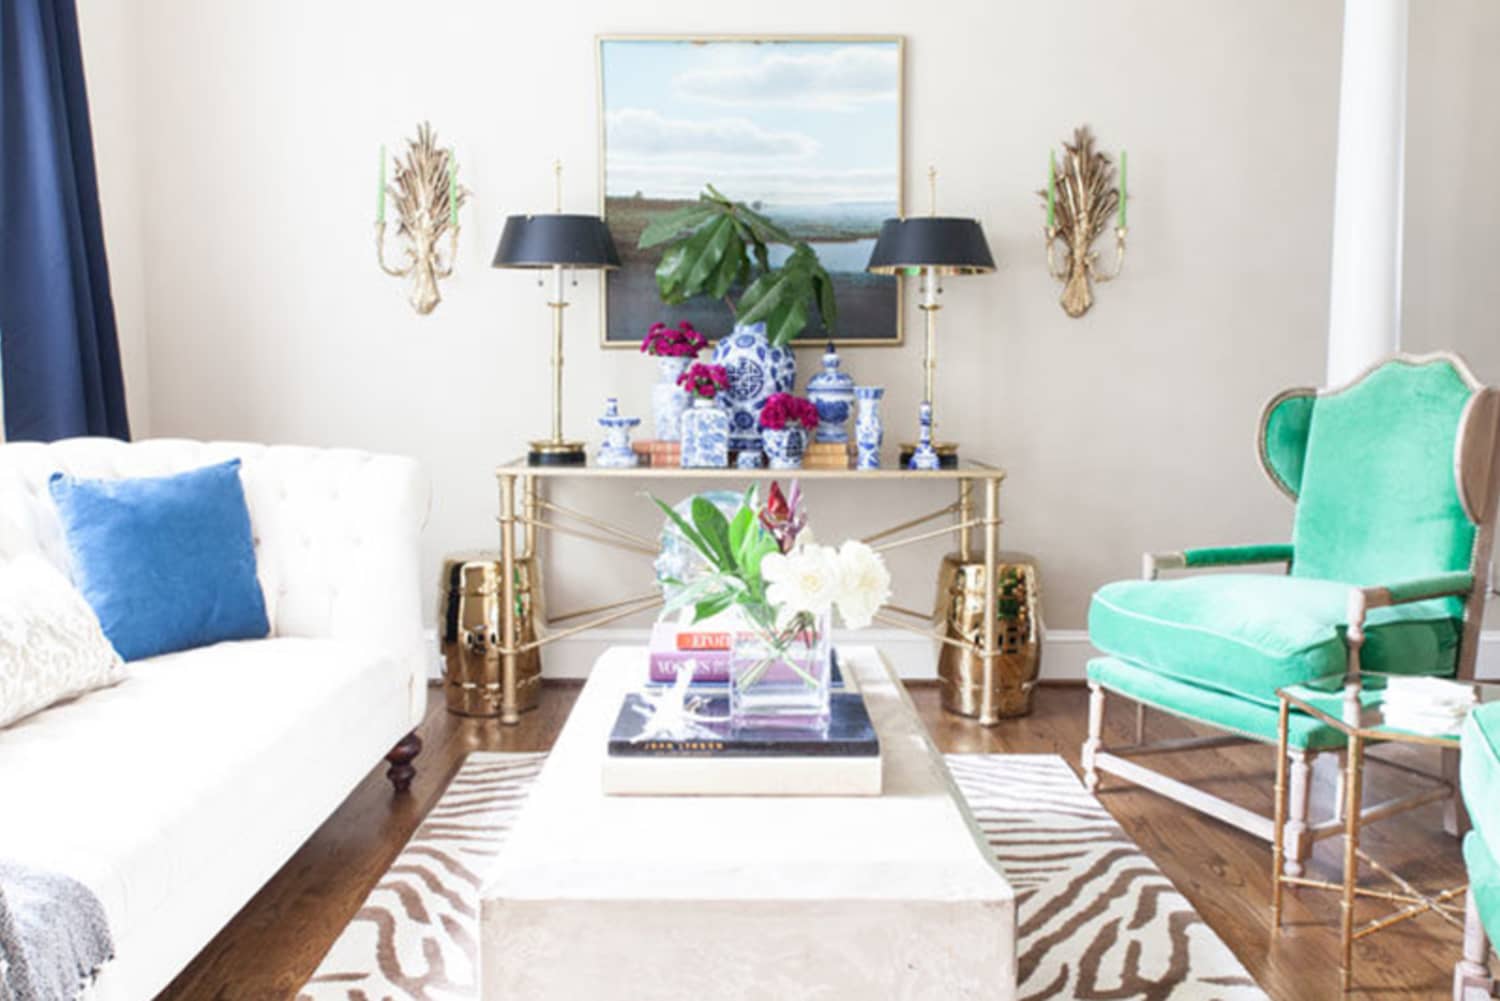 7 “Old Fashioned” Decor Ideas That Are Actually Super Chic